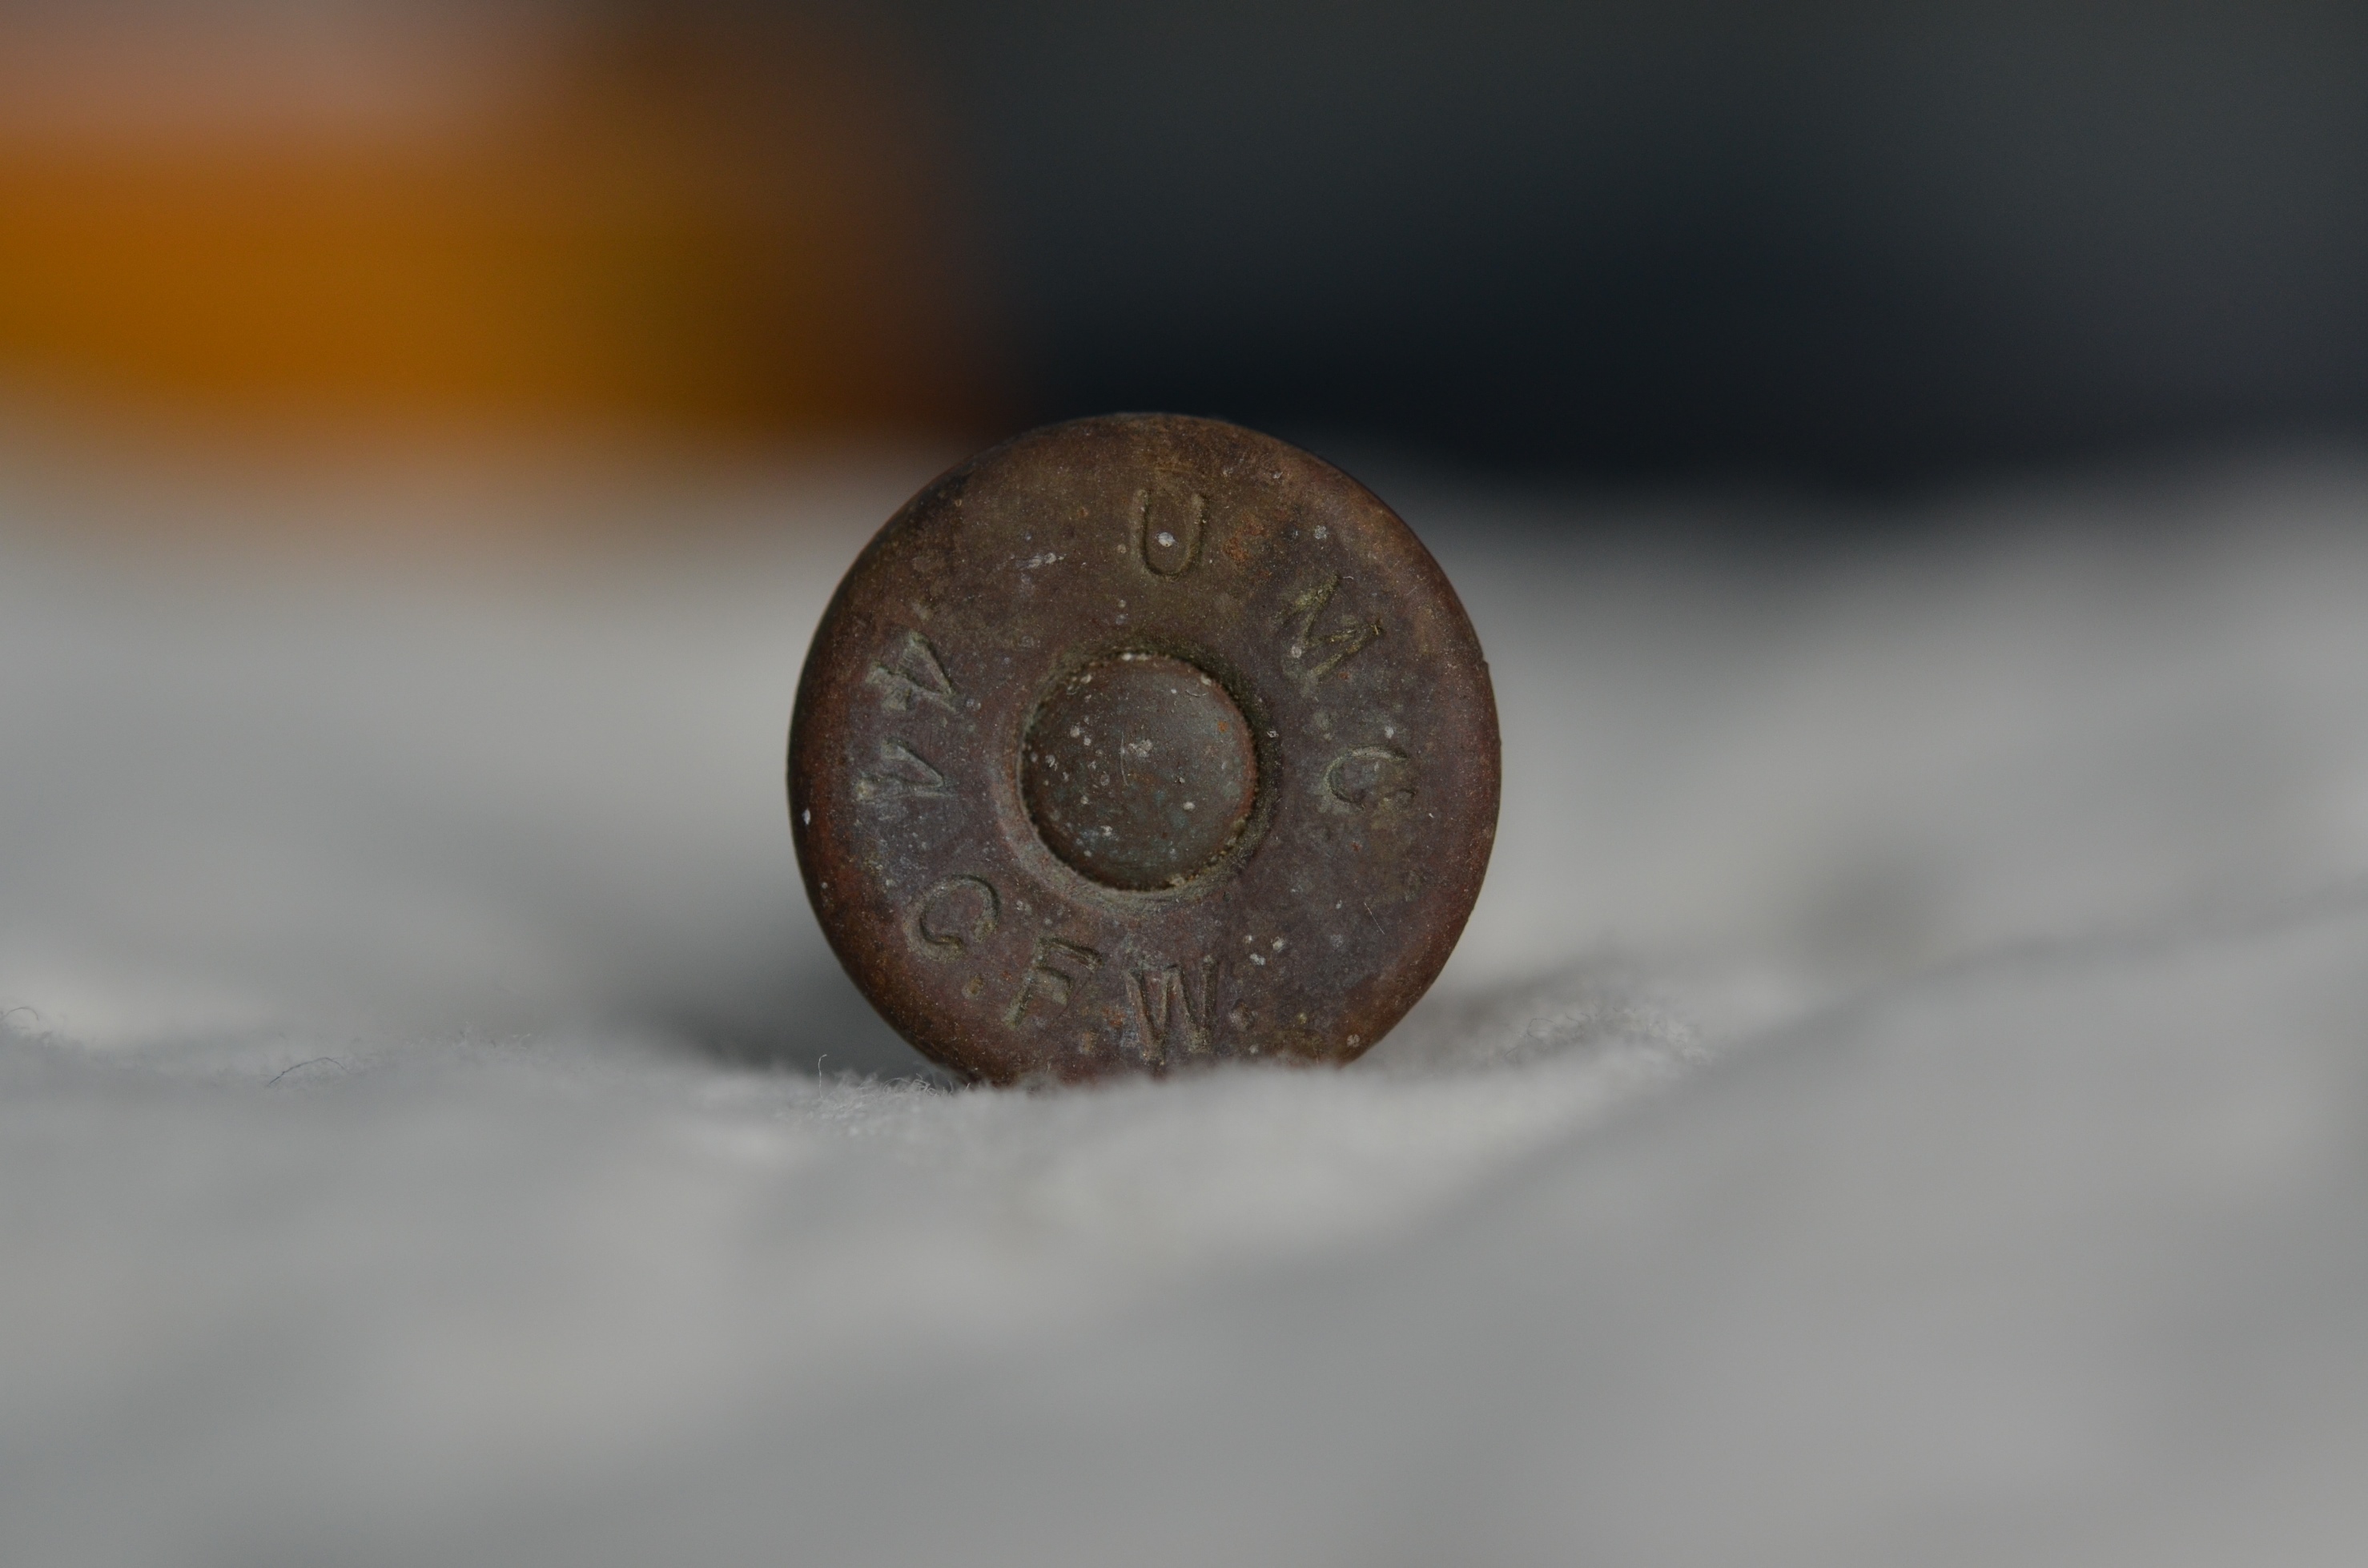 The cartridge found in the stock of the Great Basin's "Forgotten Winchester"